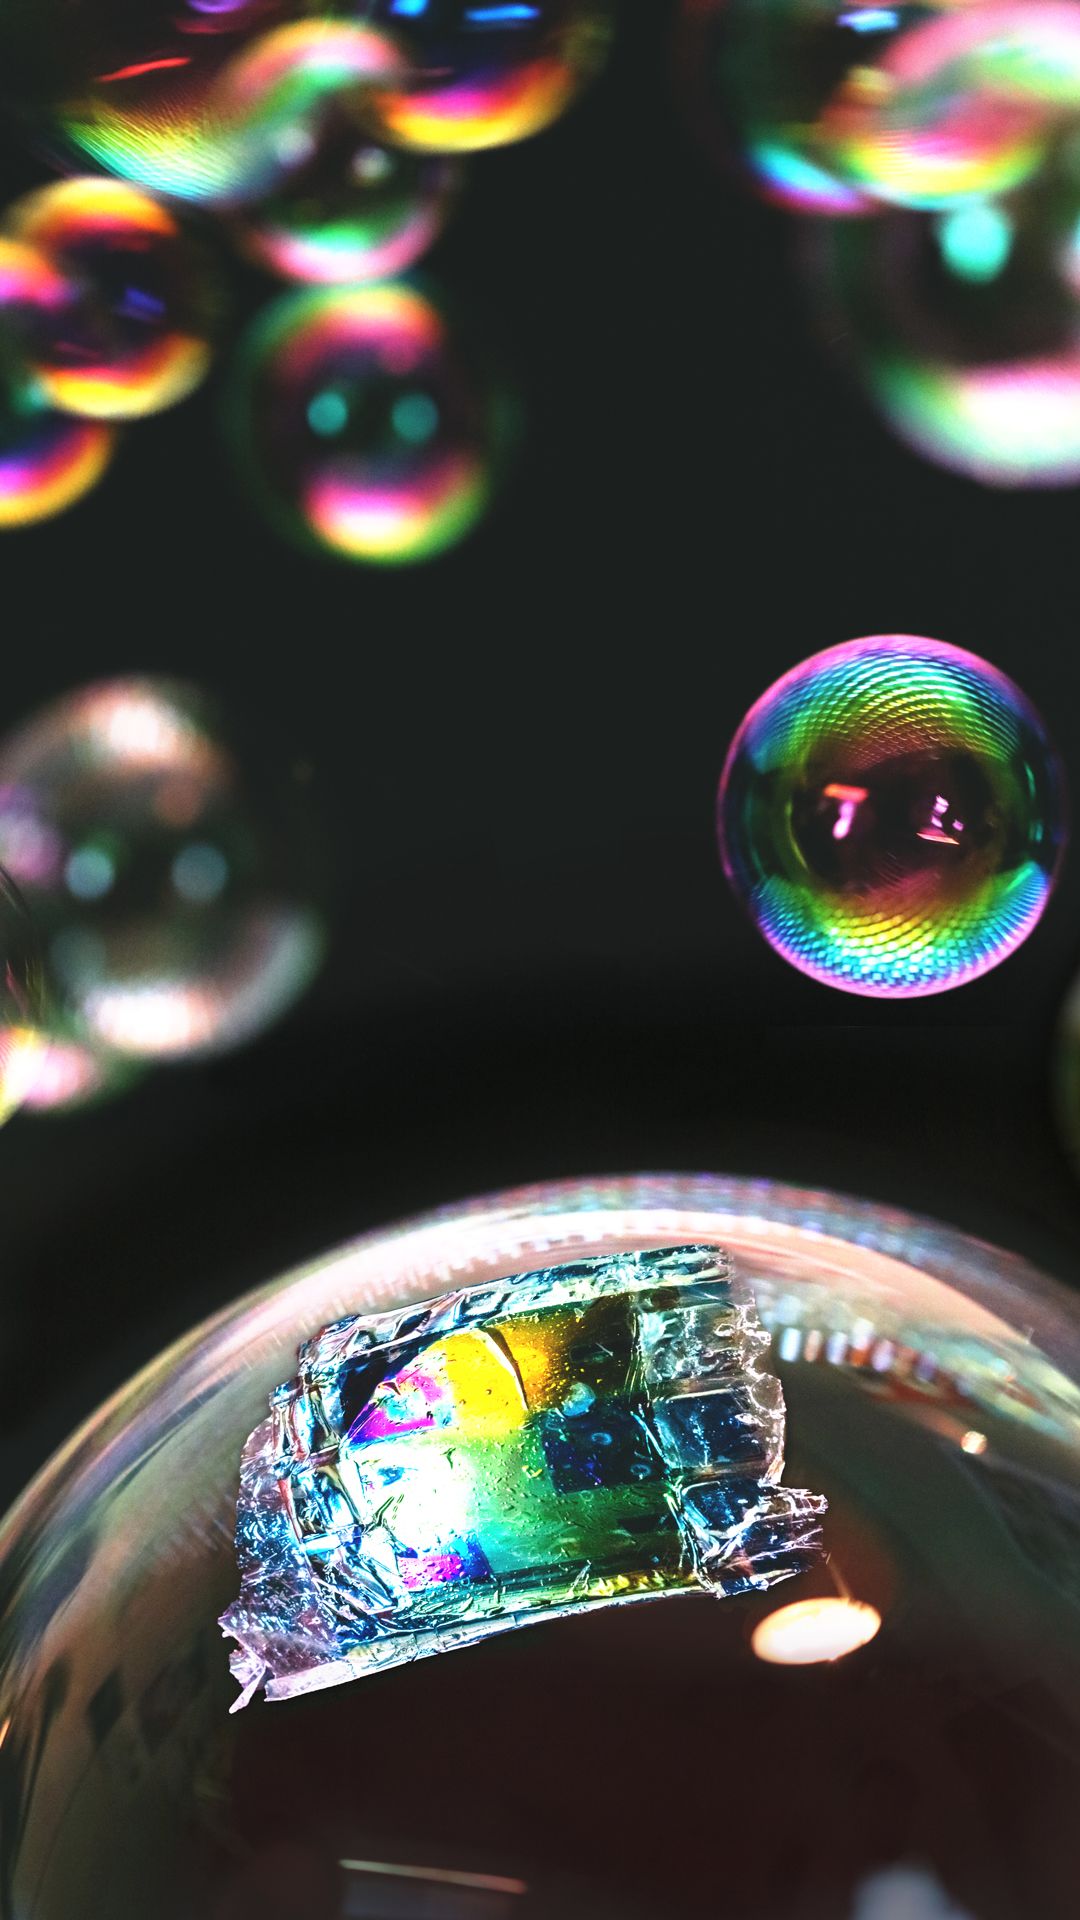 Fully printed ultrathin solar cell is light and flexible enough to rest on the surface of a soap bubble.